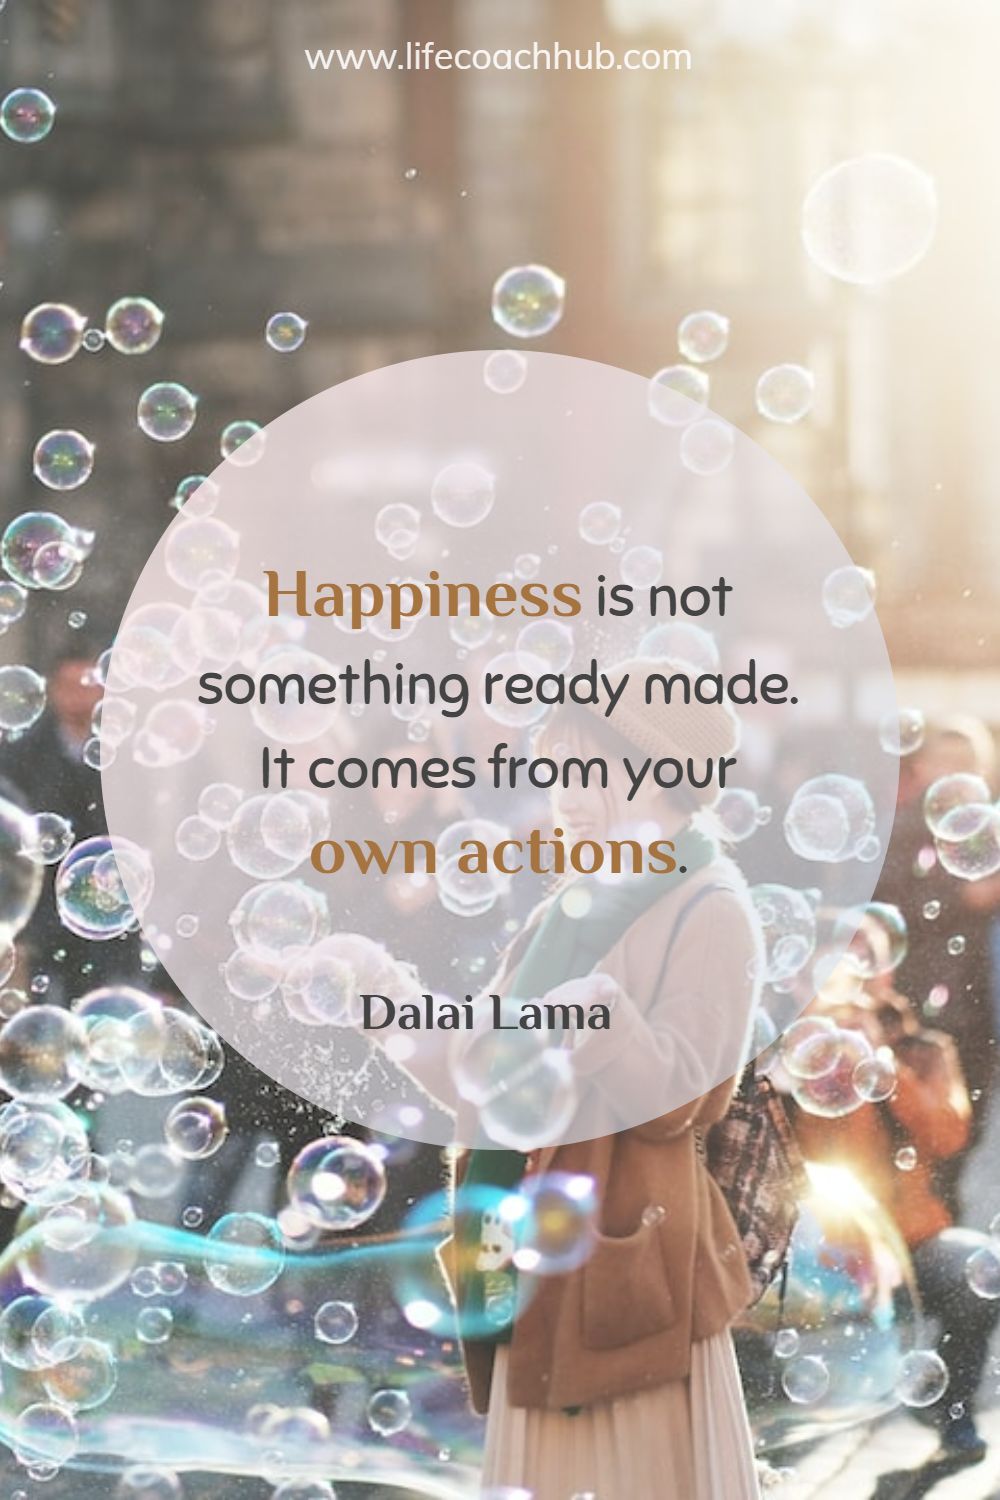 Happiness is not something ready made. It comes from your own actions. Dalai Lama Coaching Quote